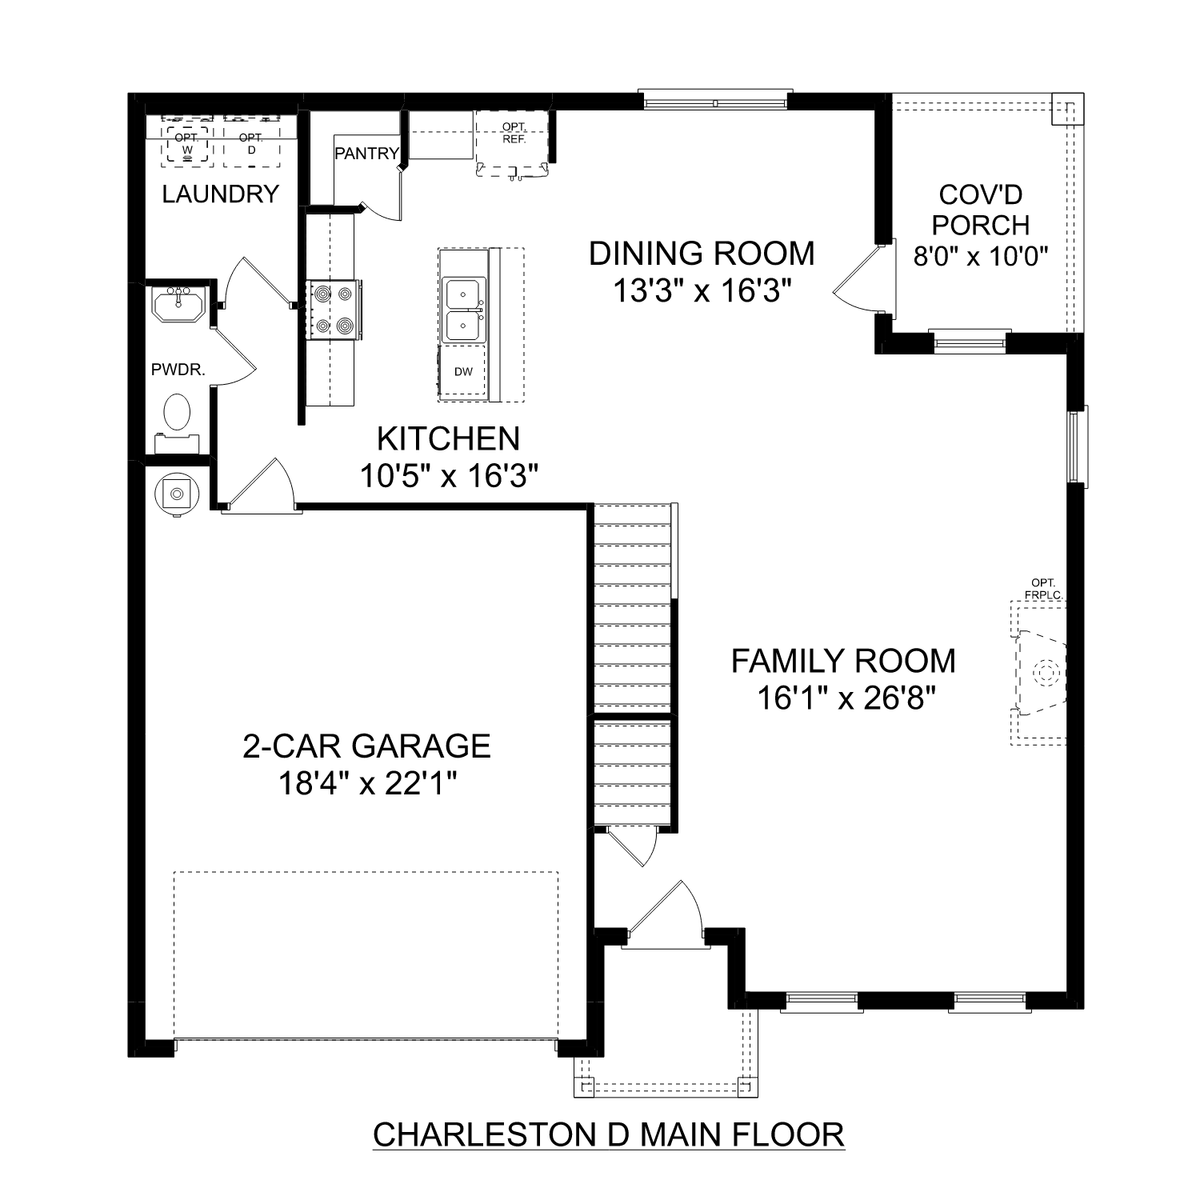 1 - The Charleston D buildable floor plan layout in Davidson Homes' Creek Grove community.